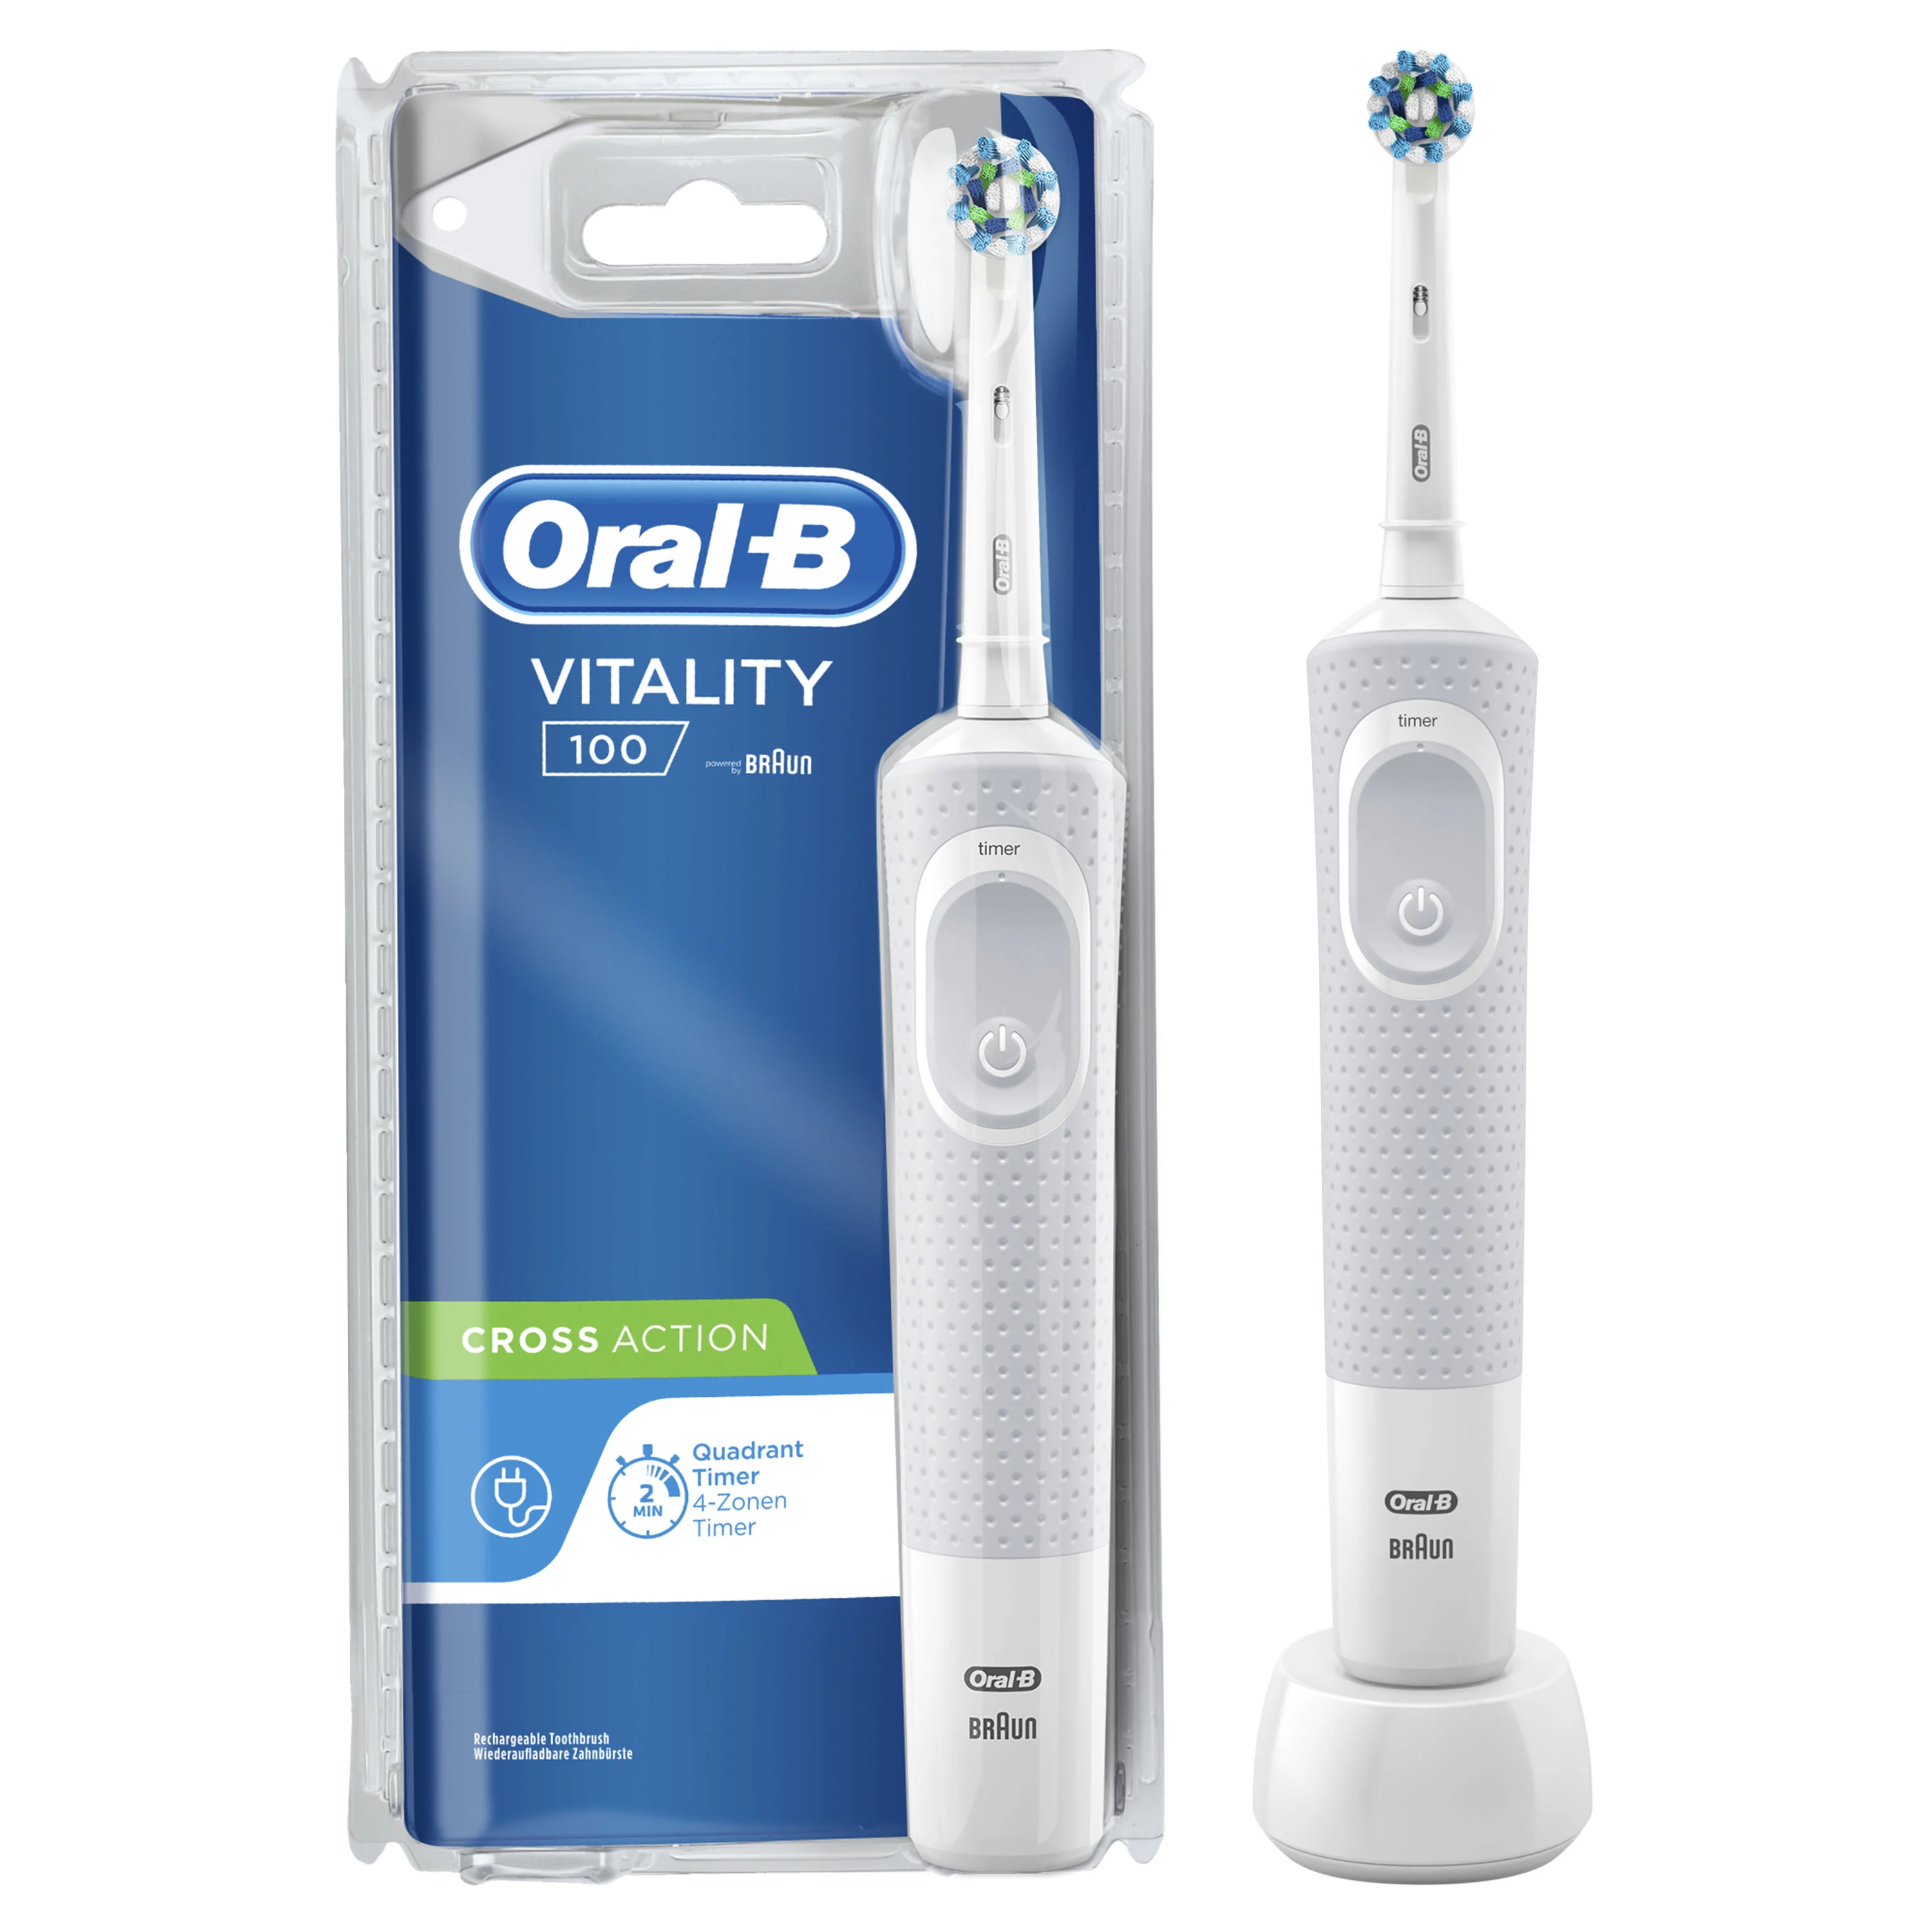 Oral-B Vitality 100 White Criss Cross Electric Rechargeable Toothbrush Powered By Braun 